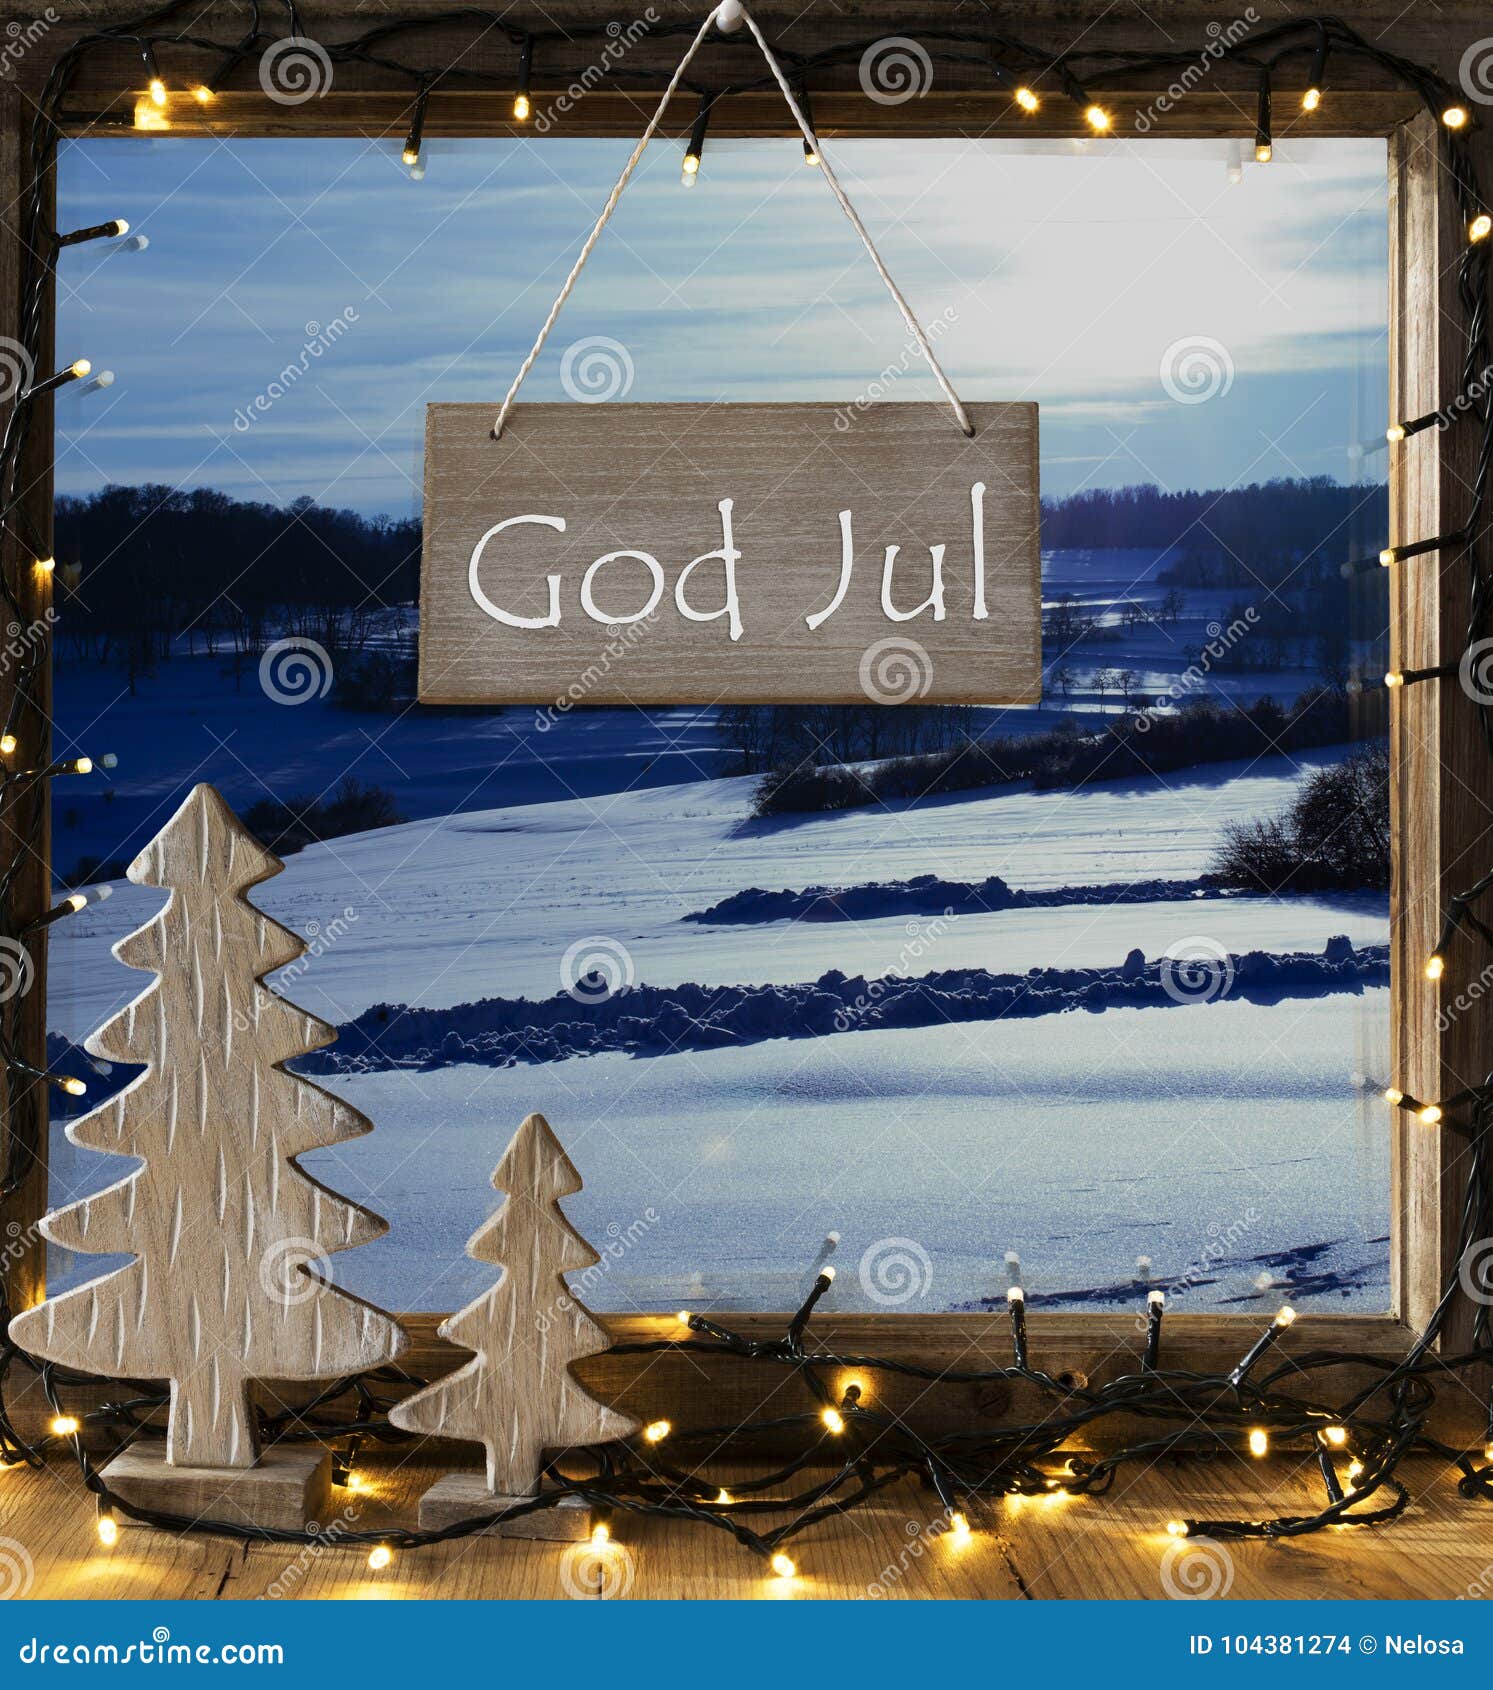 Sign With Swedish Text God Jul Means Merry Christmas Window Frame With Winter Landscape With Snow View To Snowy Scenery Outside Christmas Tree And Fairy